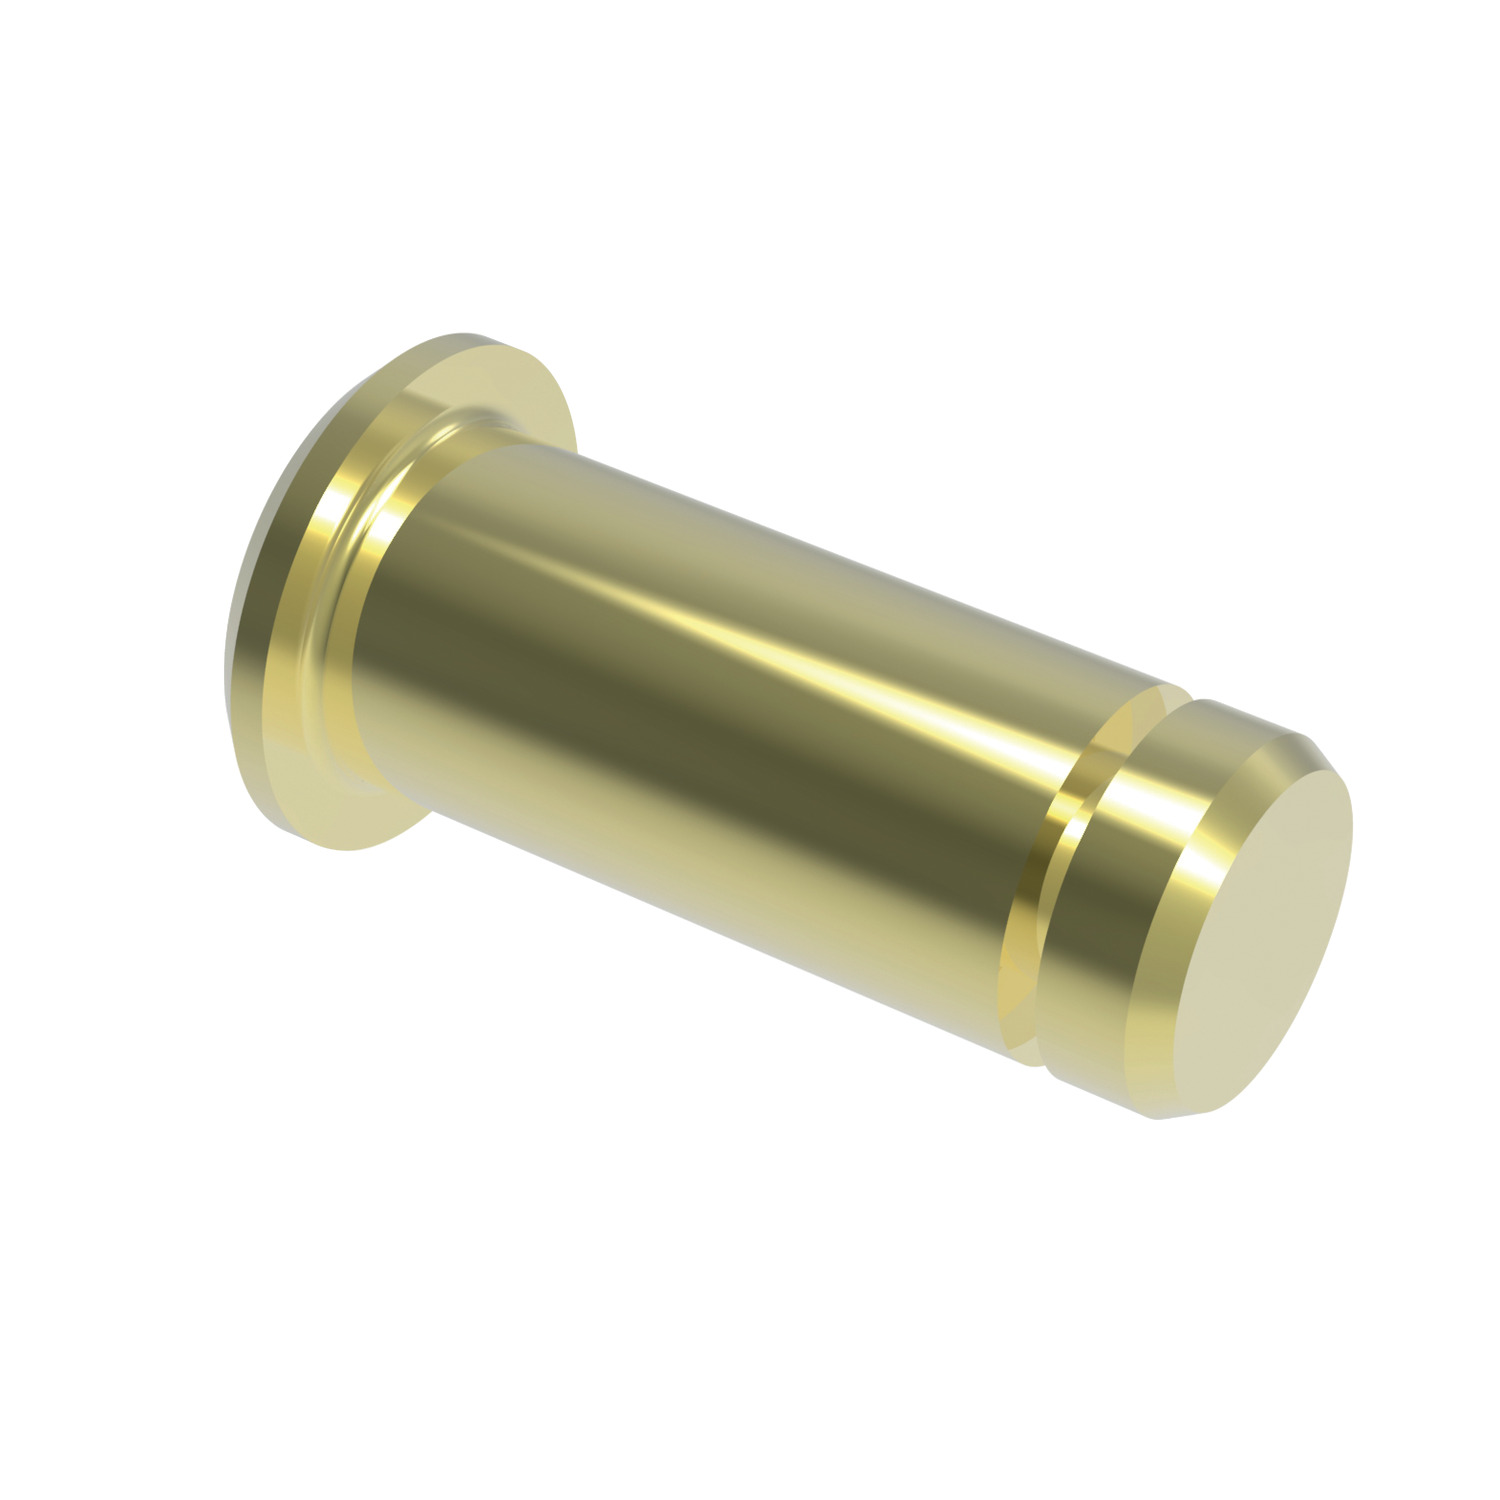 Clevis Pins - Imperial (NBI) Yellow zinc-plated clevis pins available from stock. Designed for use with clevis joints.